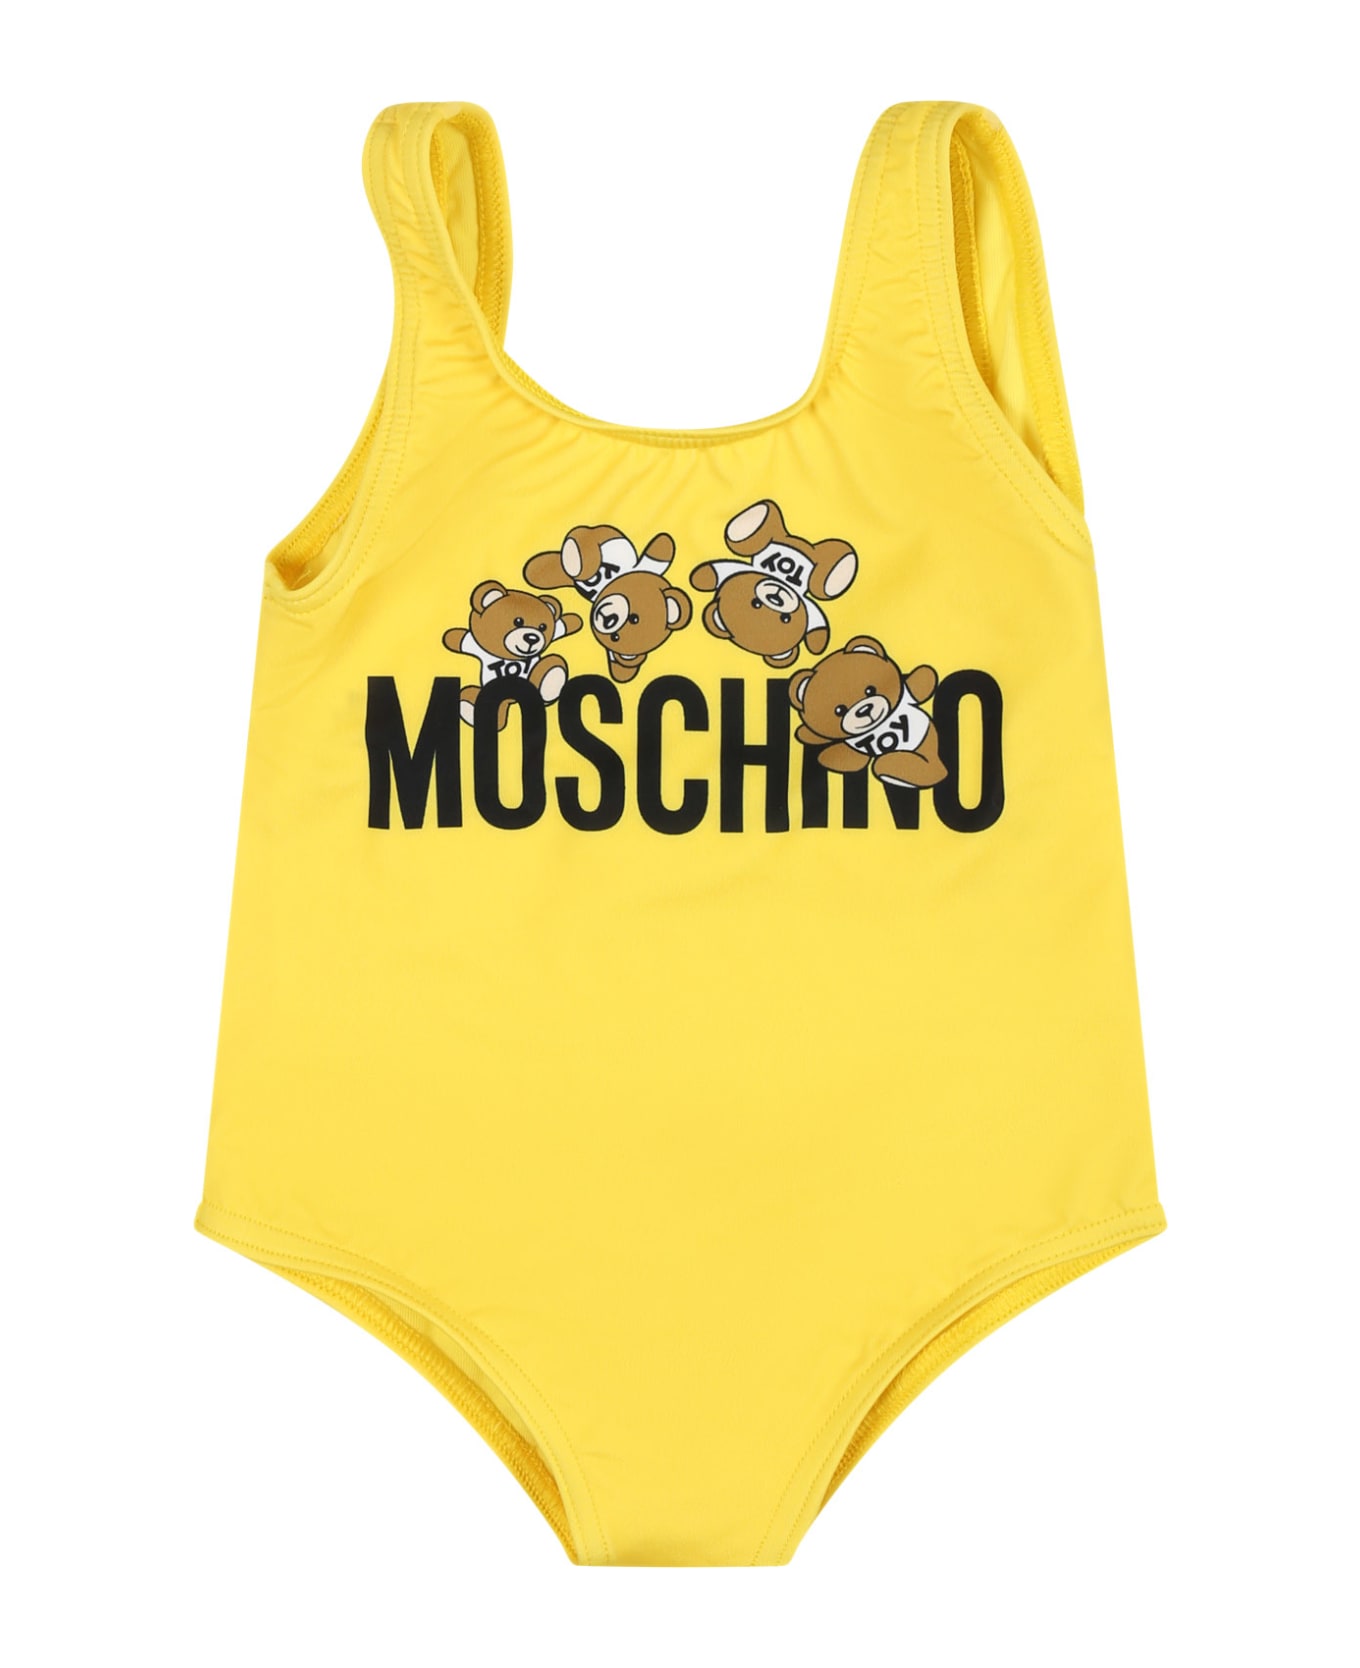 Moschino Yellow One-piece Swimsuit For Baby Girl With Logo And Teddy Bear - Yellow